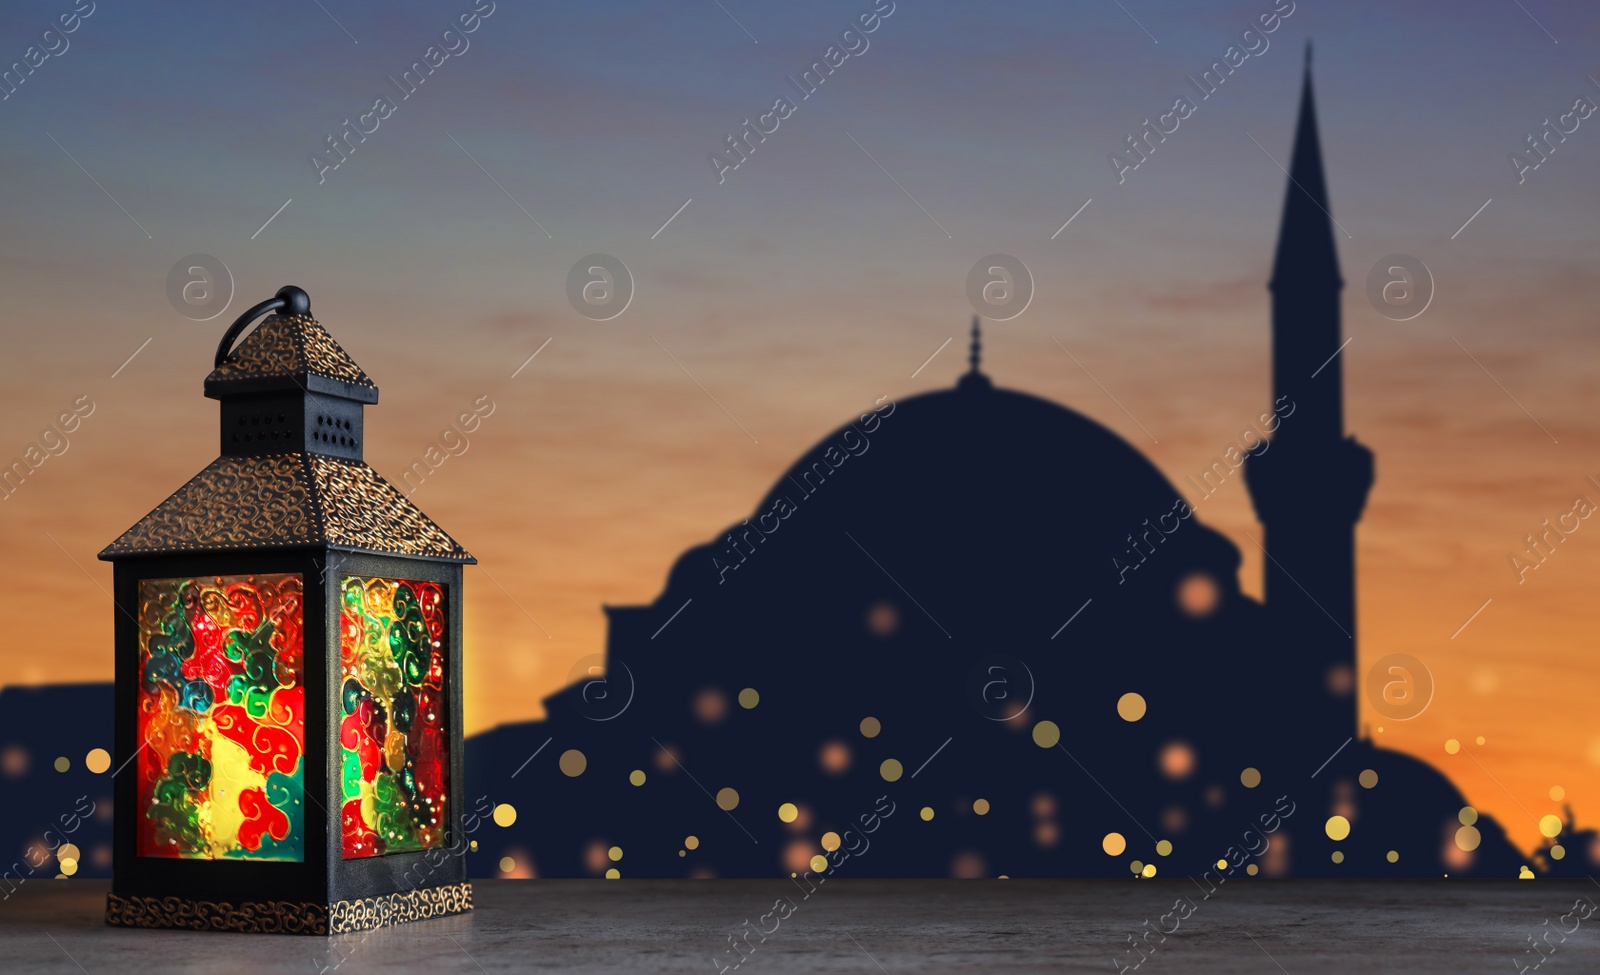 Image of Decorative Arabic lantern on stone surface and silhouette of mosque at sunset on background, space for text